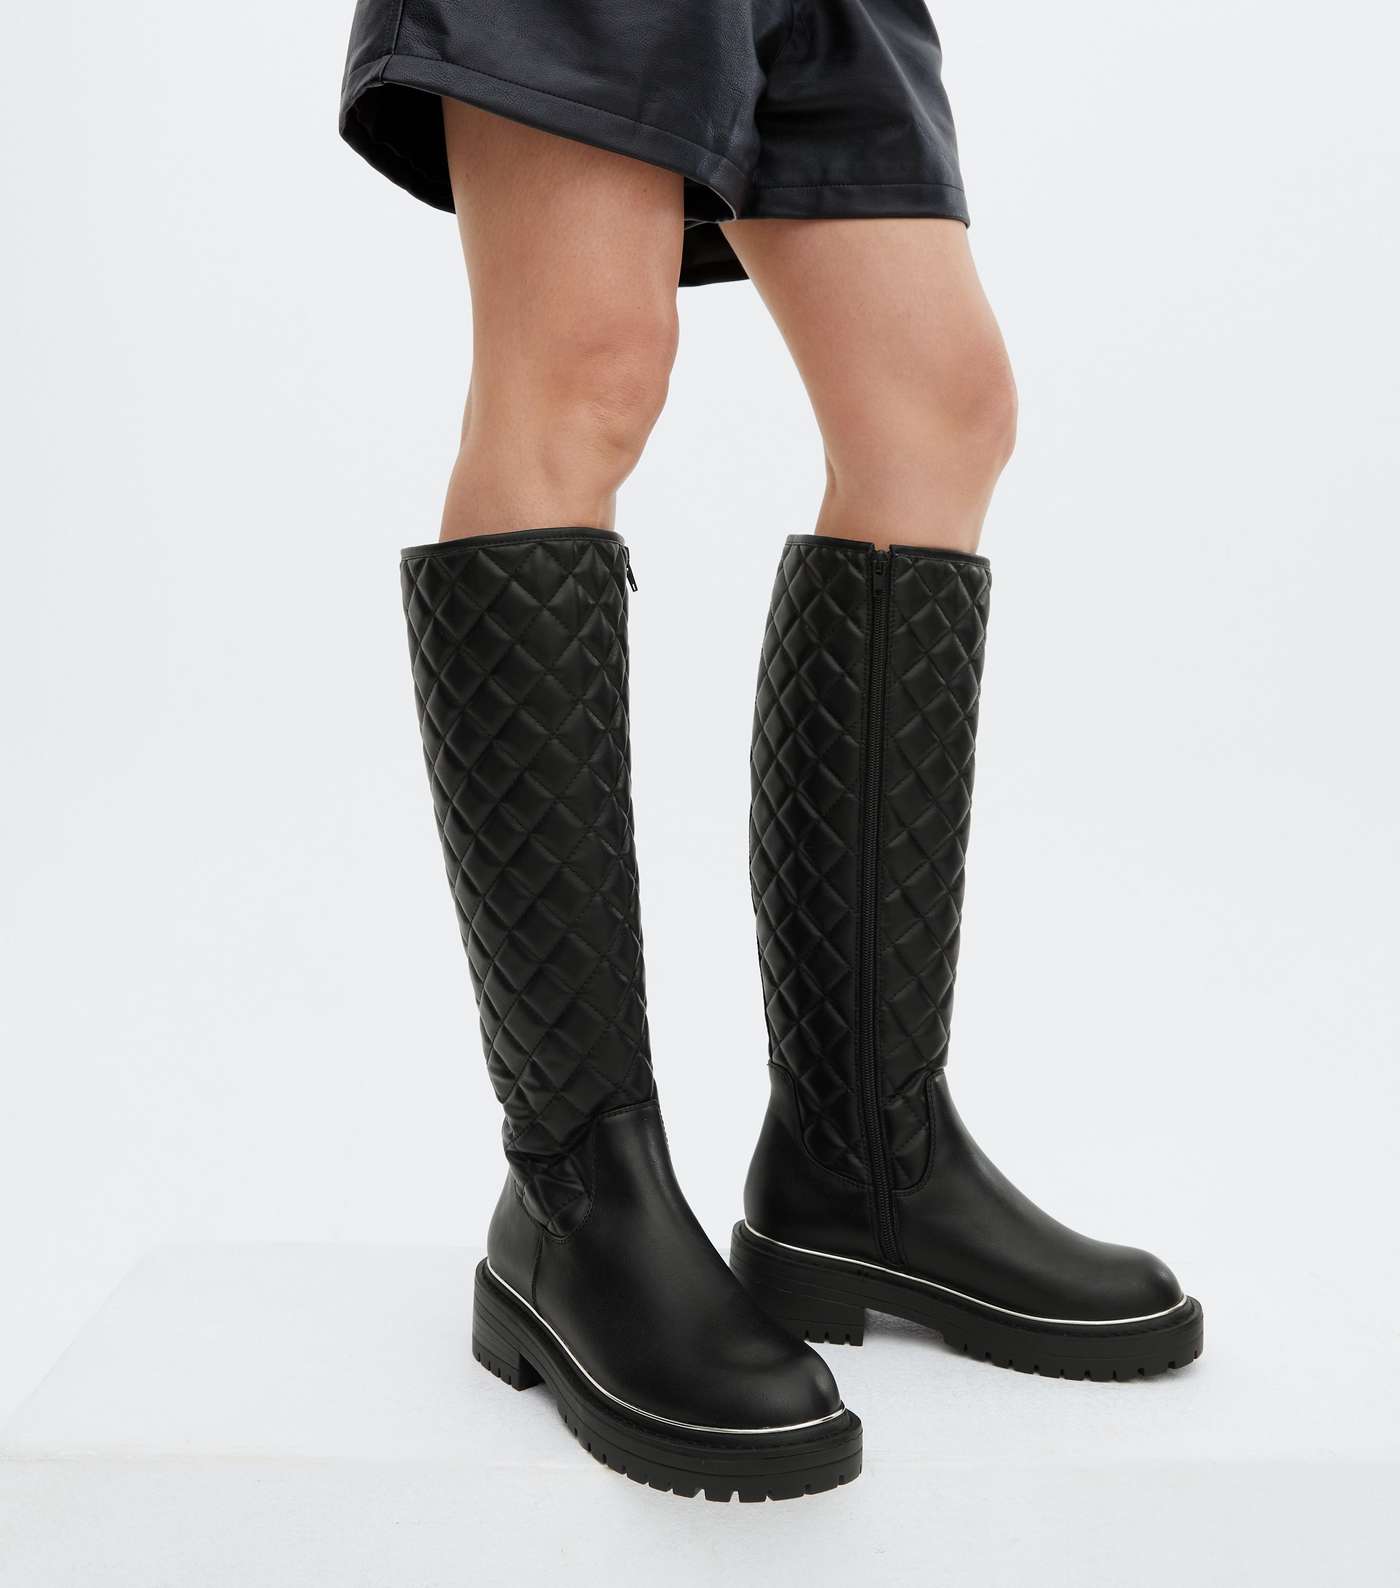 Black Quilted Metal Trim Knee High Boots Image 2